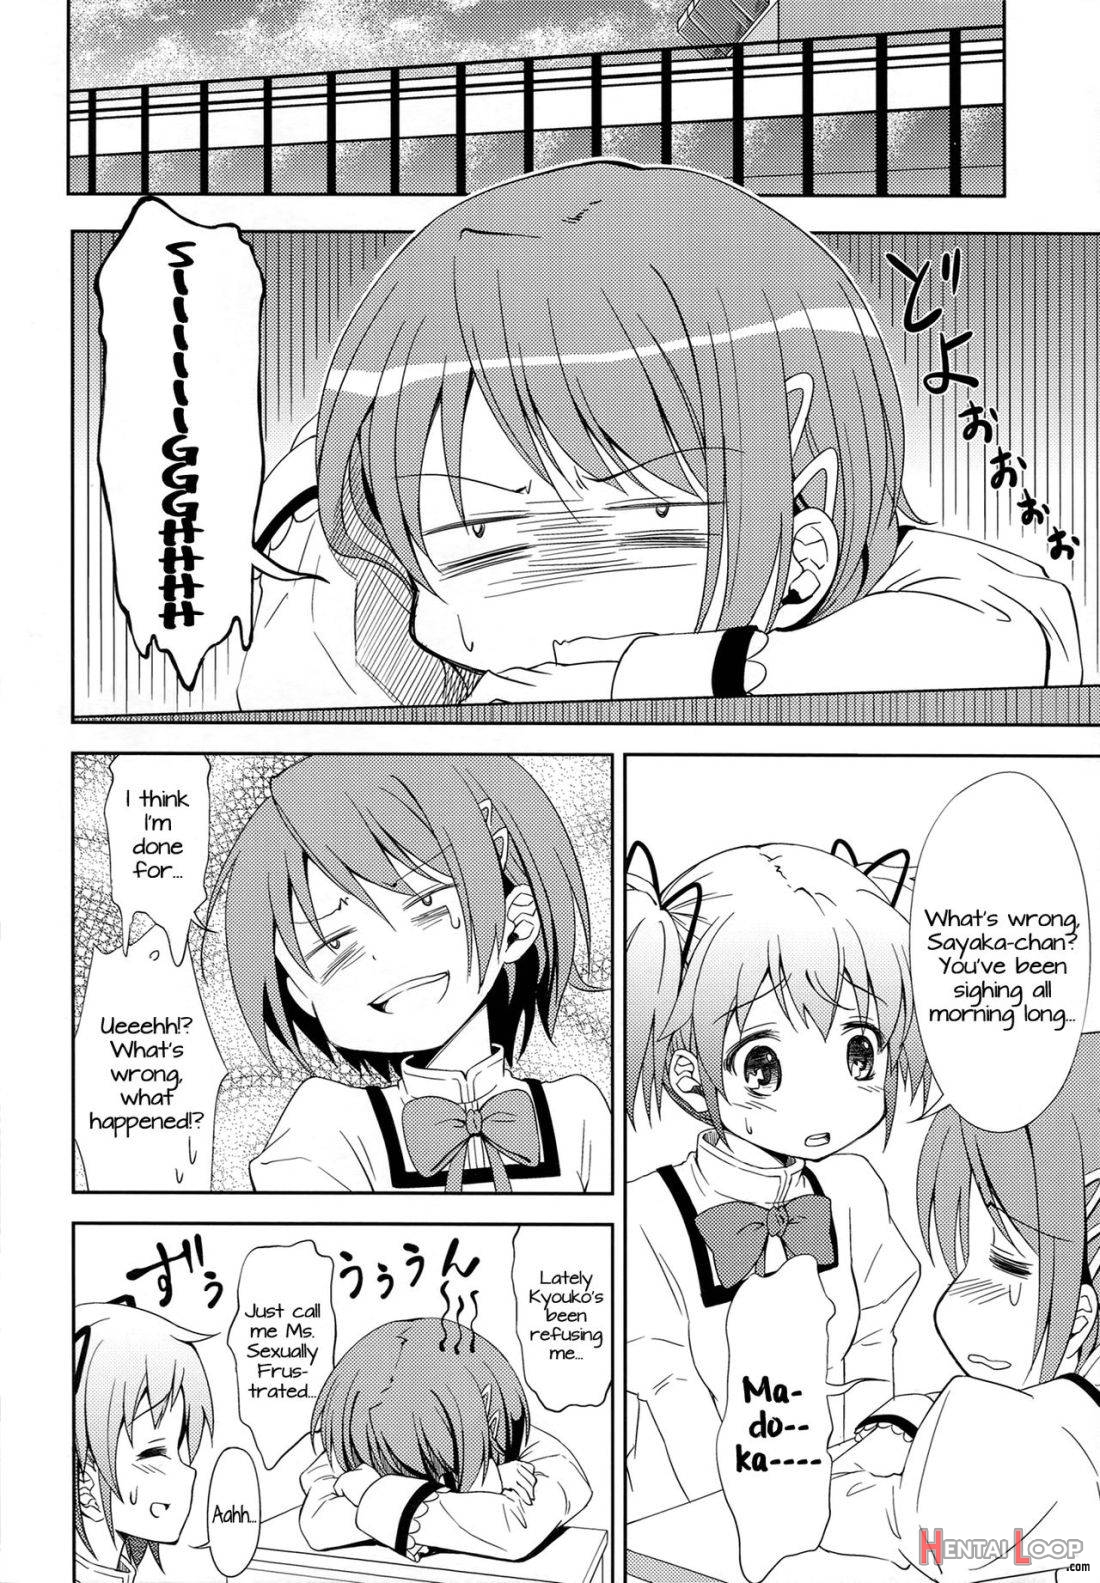 Lovely Girls’ Lily vol.4 page 5